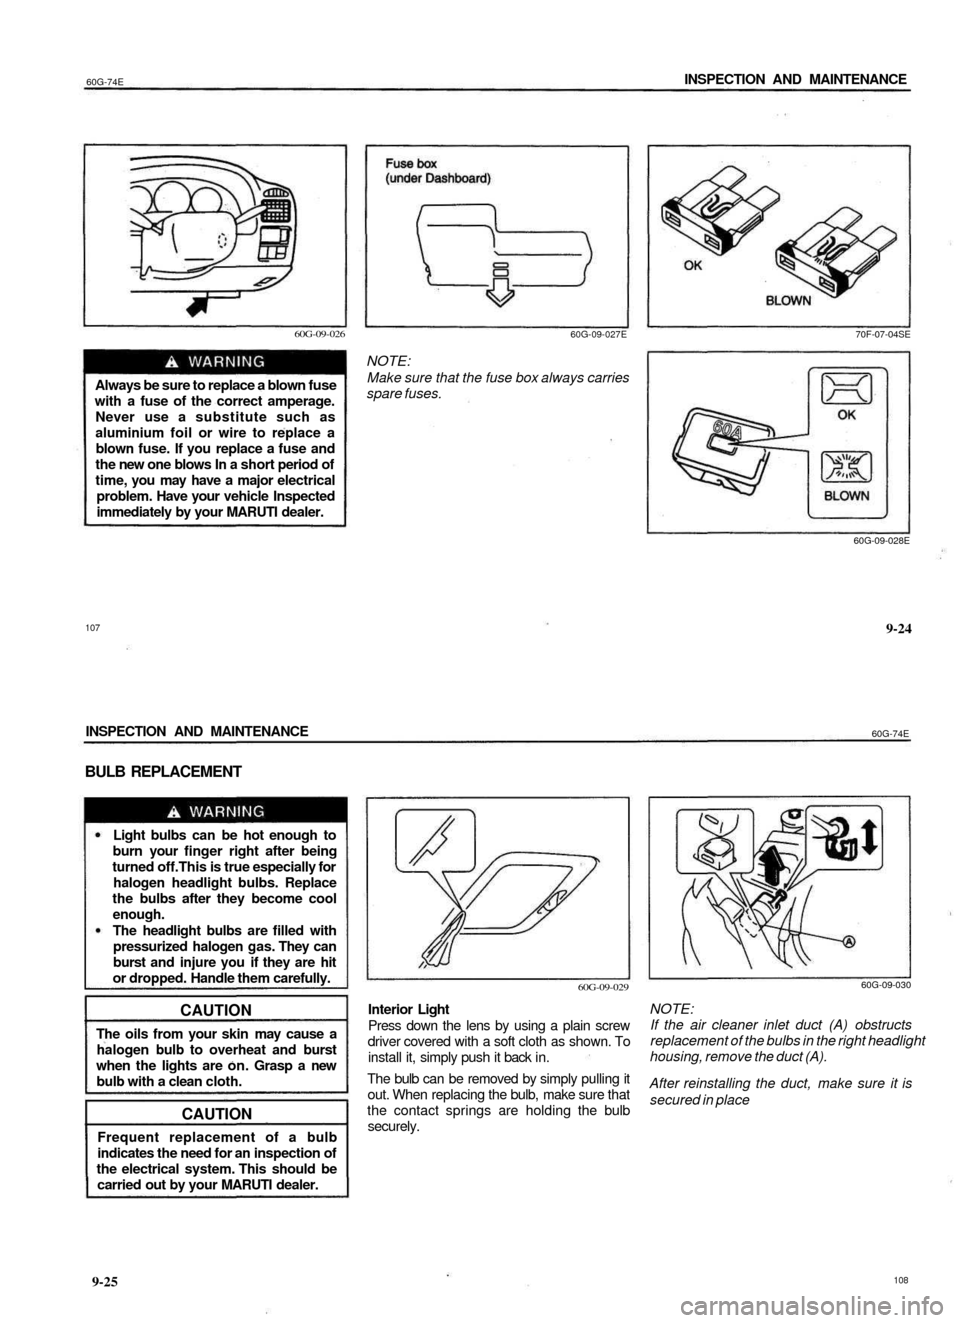 SUZUKI BALENO 1999 1.G Owners Manual 
60G-74E 
INSPECTION AND MAINTENANCE

60G-09-026

Always be sure to replace a blown fuse

with a fuse of the correct amperage.

Never use a substitute such as

aluminium foil or wire to replace a

blo